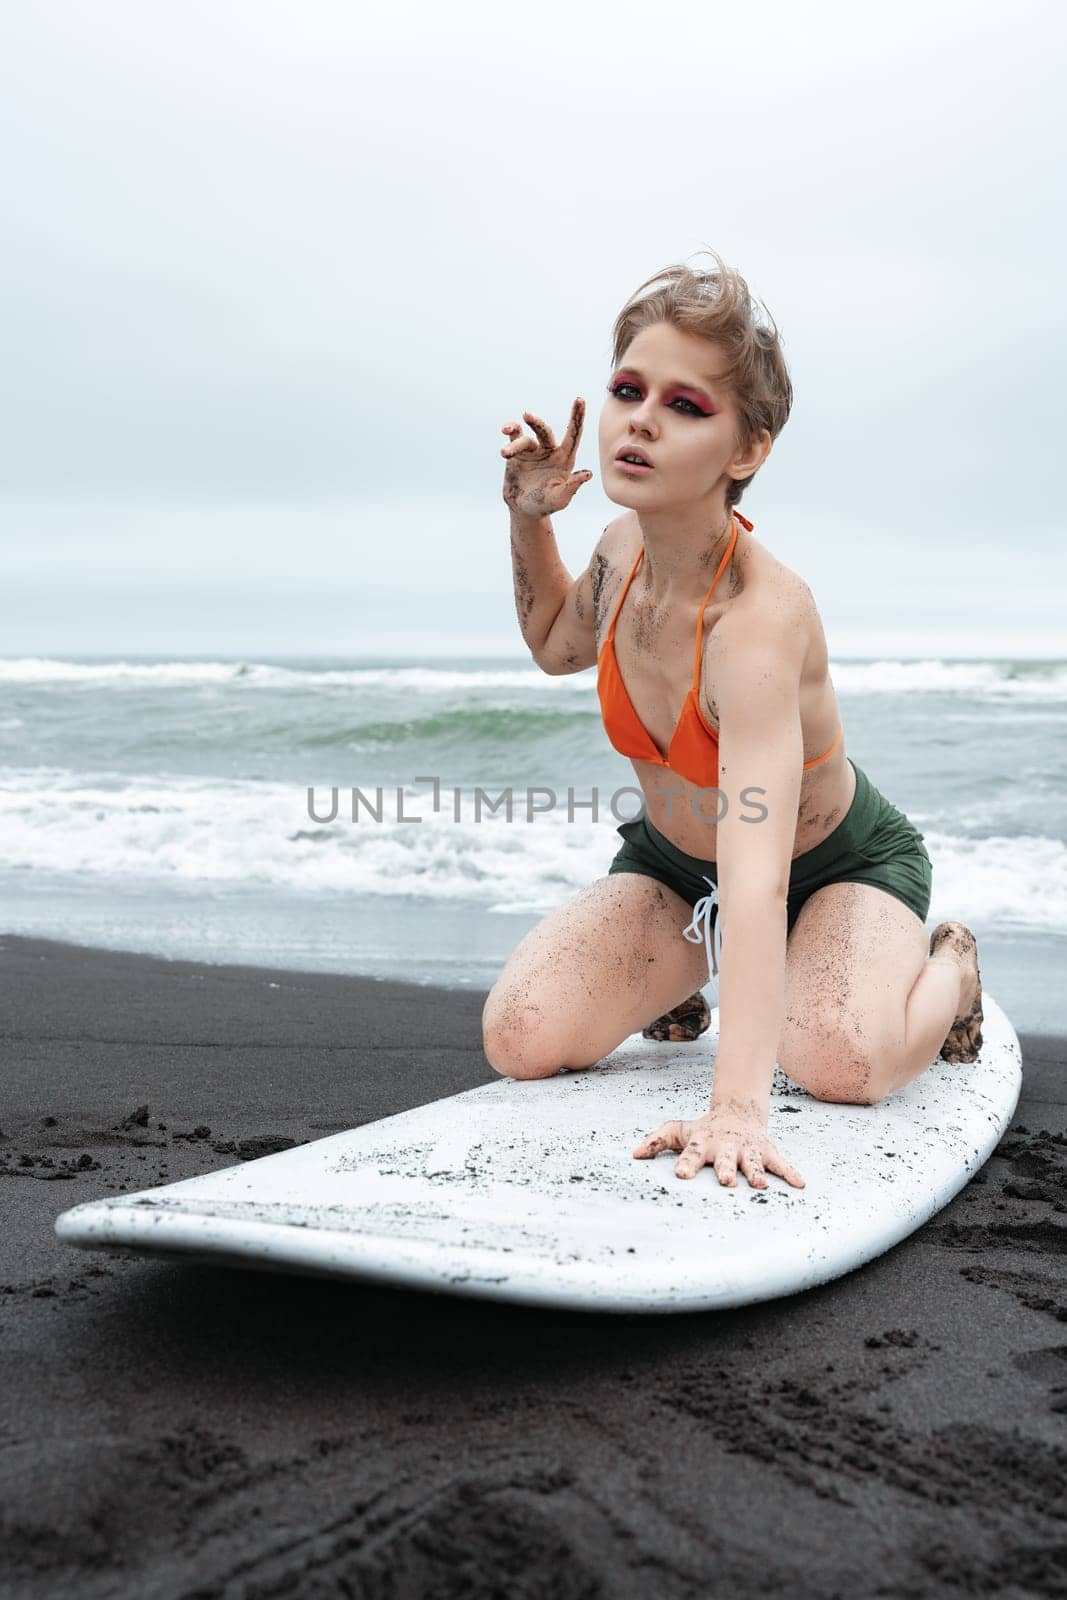 Sensuality woman surfer strikes pose on her knees atop white surfboard. Sports fashion model looking at camera. Sportswoman in bikini top and shorts, embodying combination of athleticism and beauty